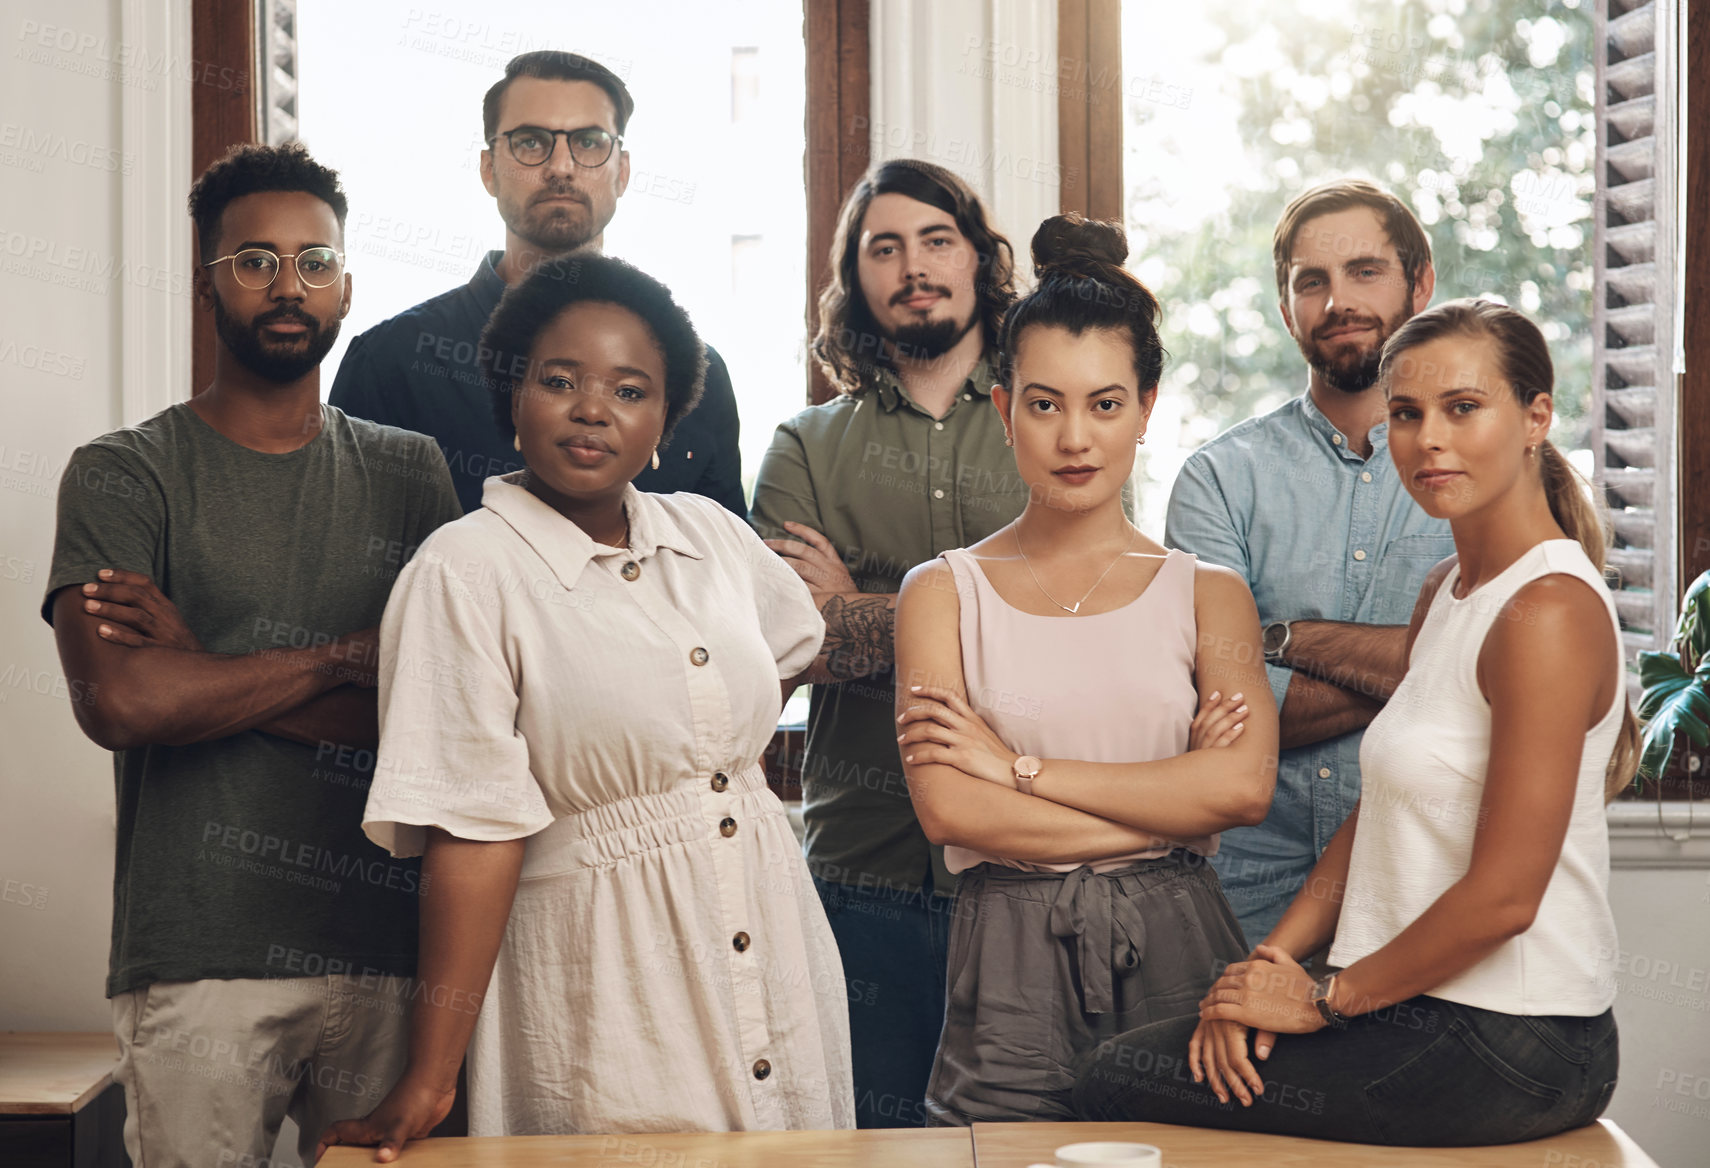 Buy stock photo Serious business people standing with arms crossed, looking confident and showing teamwork in an office together at work. Portrait of diverse creative employees expressing power, unity and success